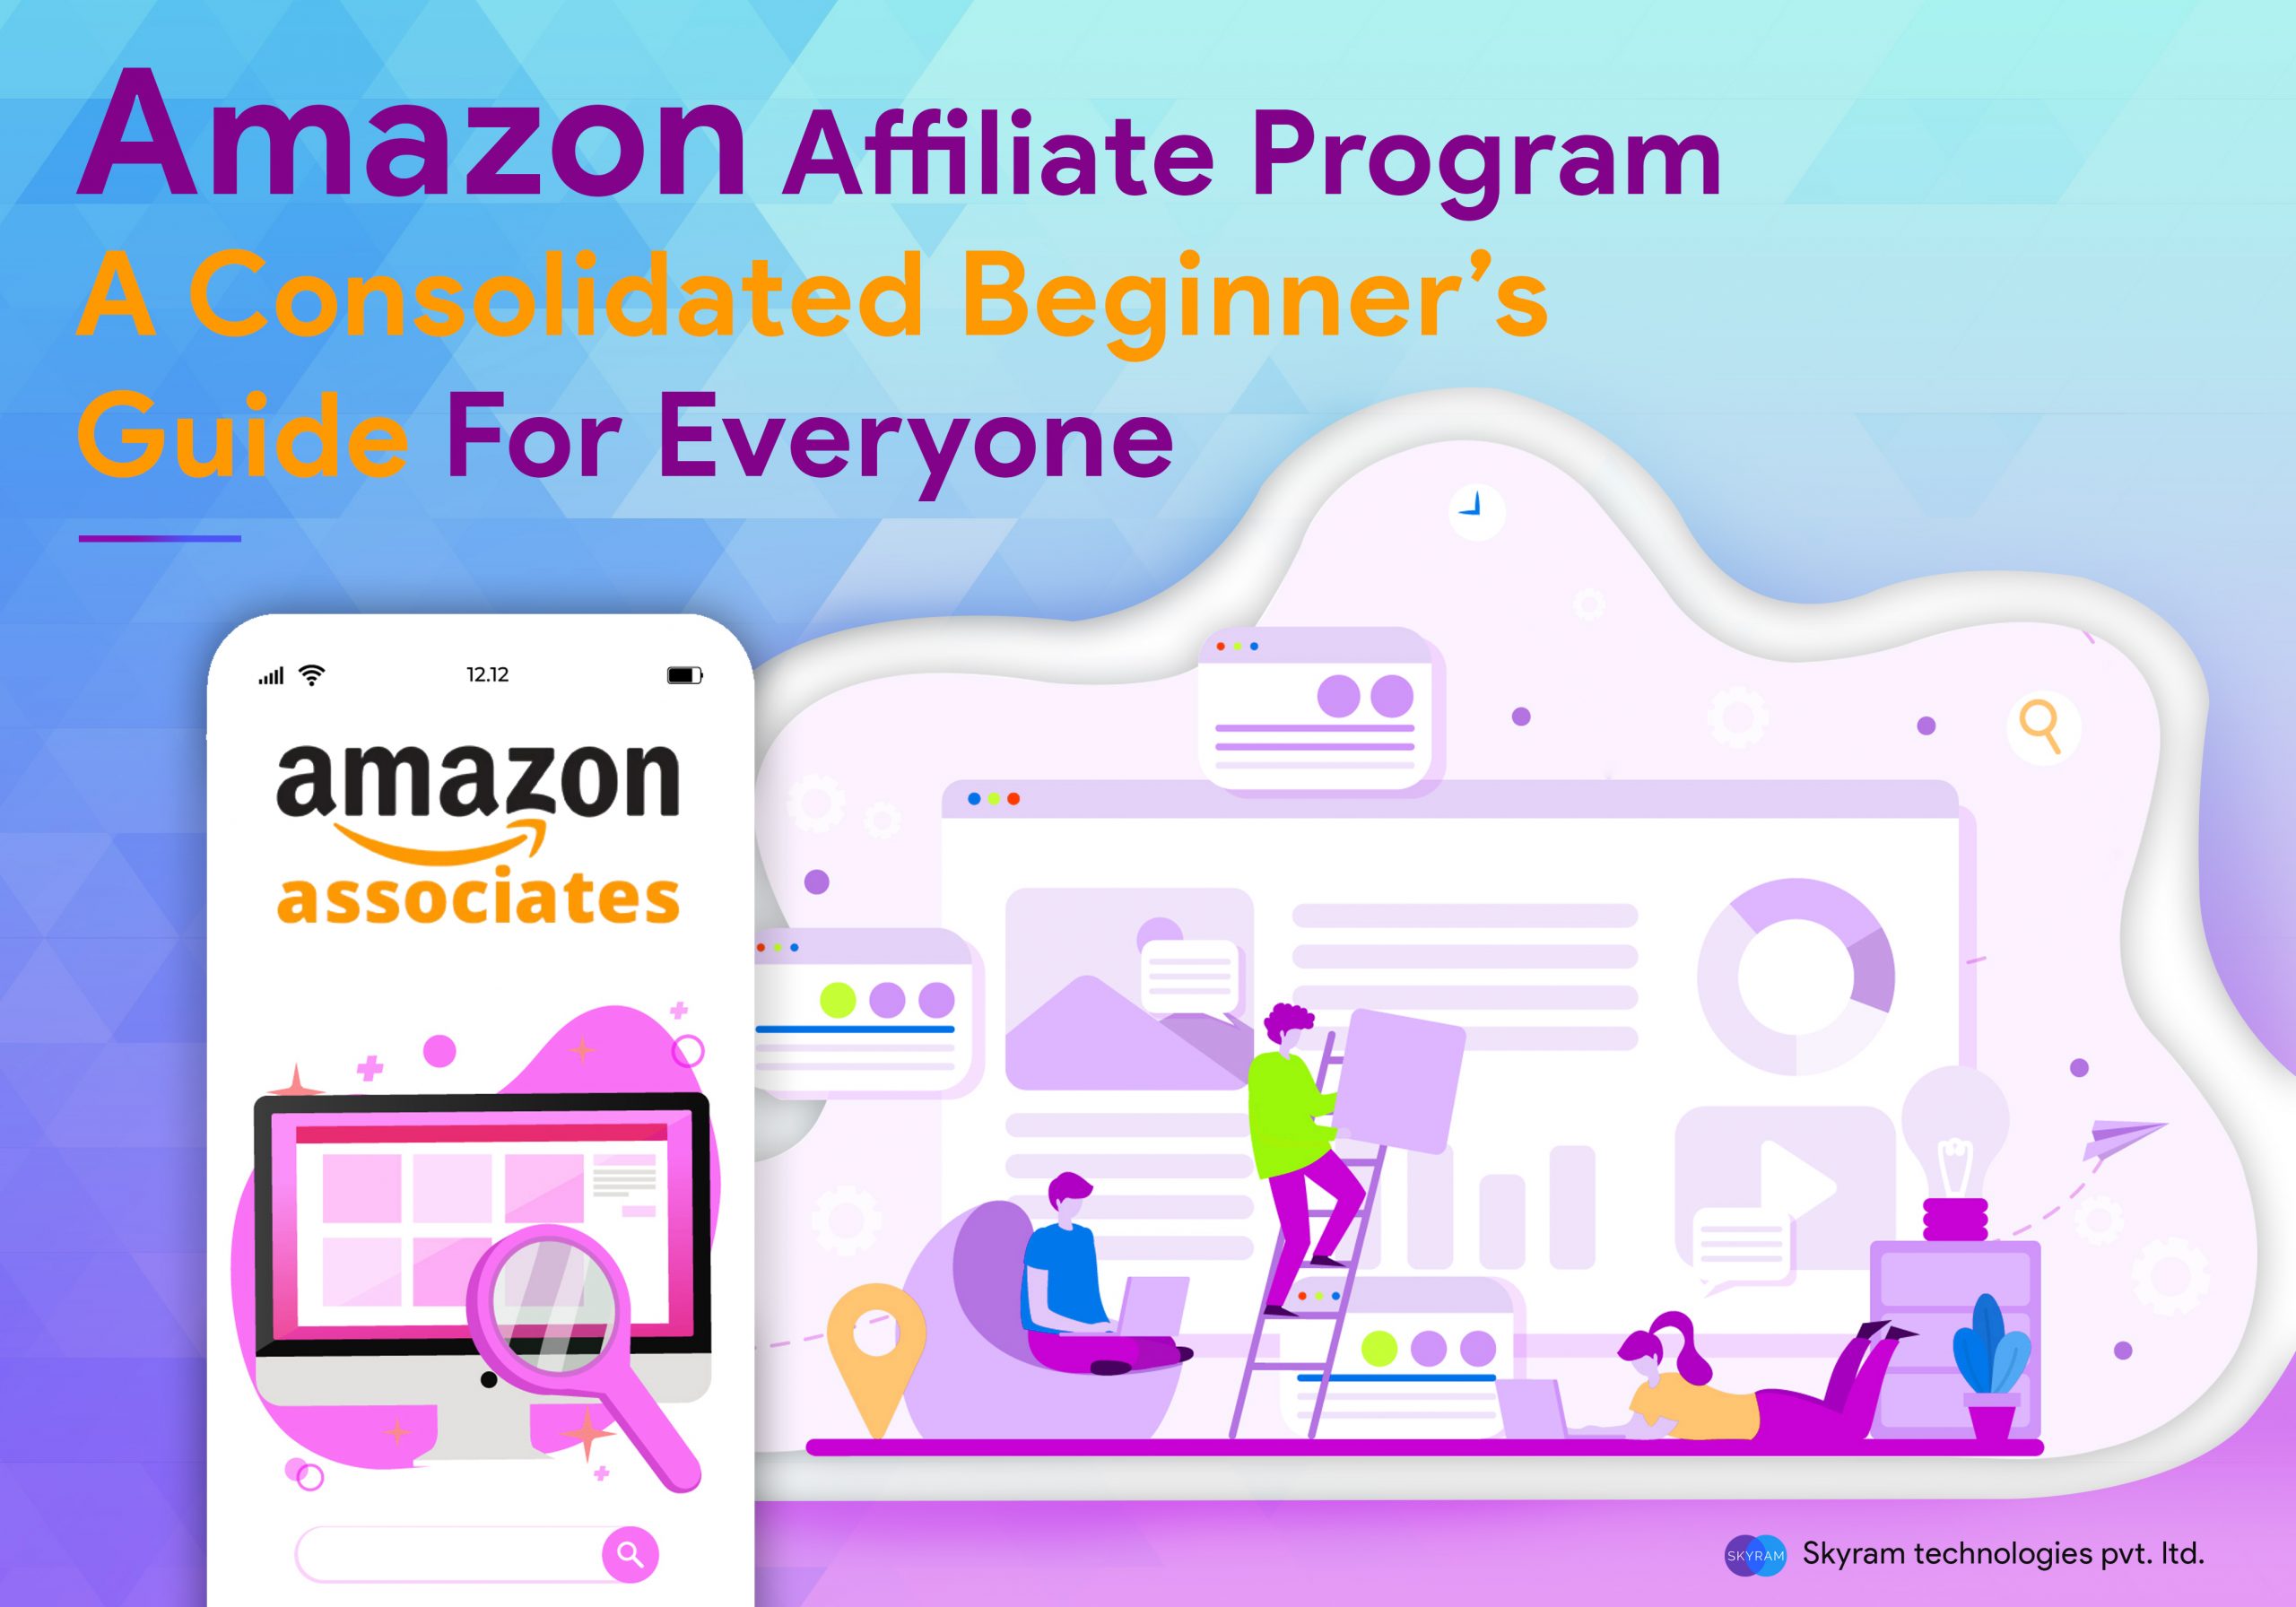 Amazon Affiliate Program – A consolidated beginner’s guide for everyone